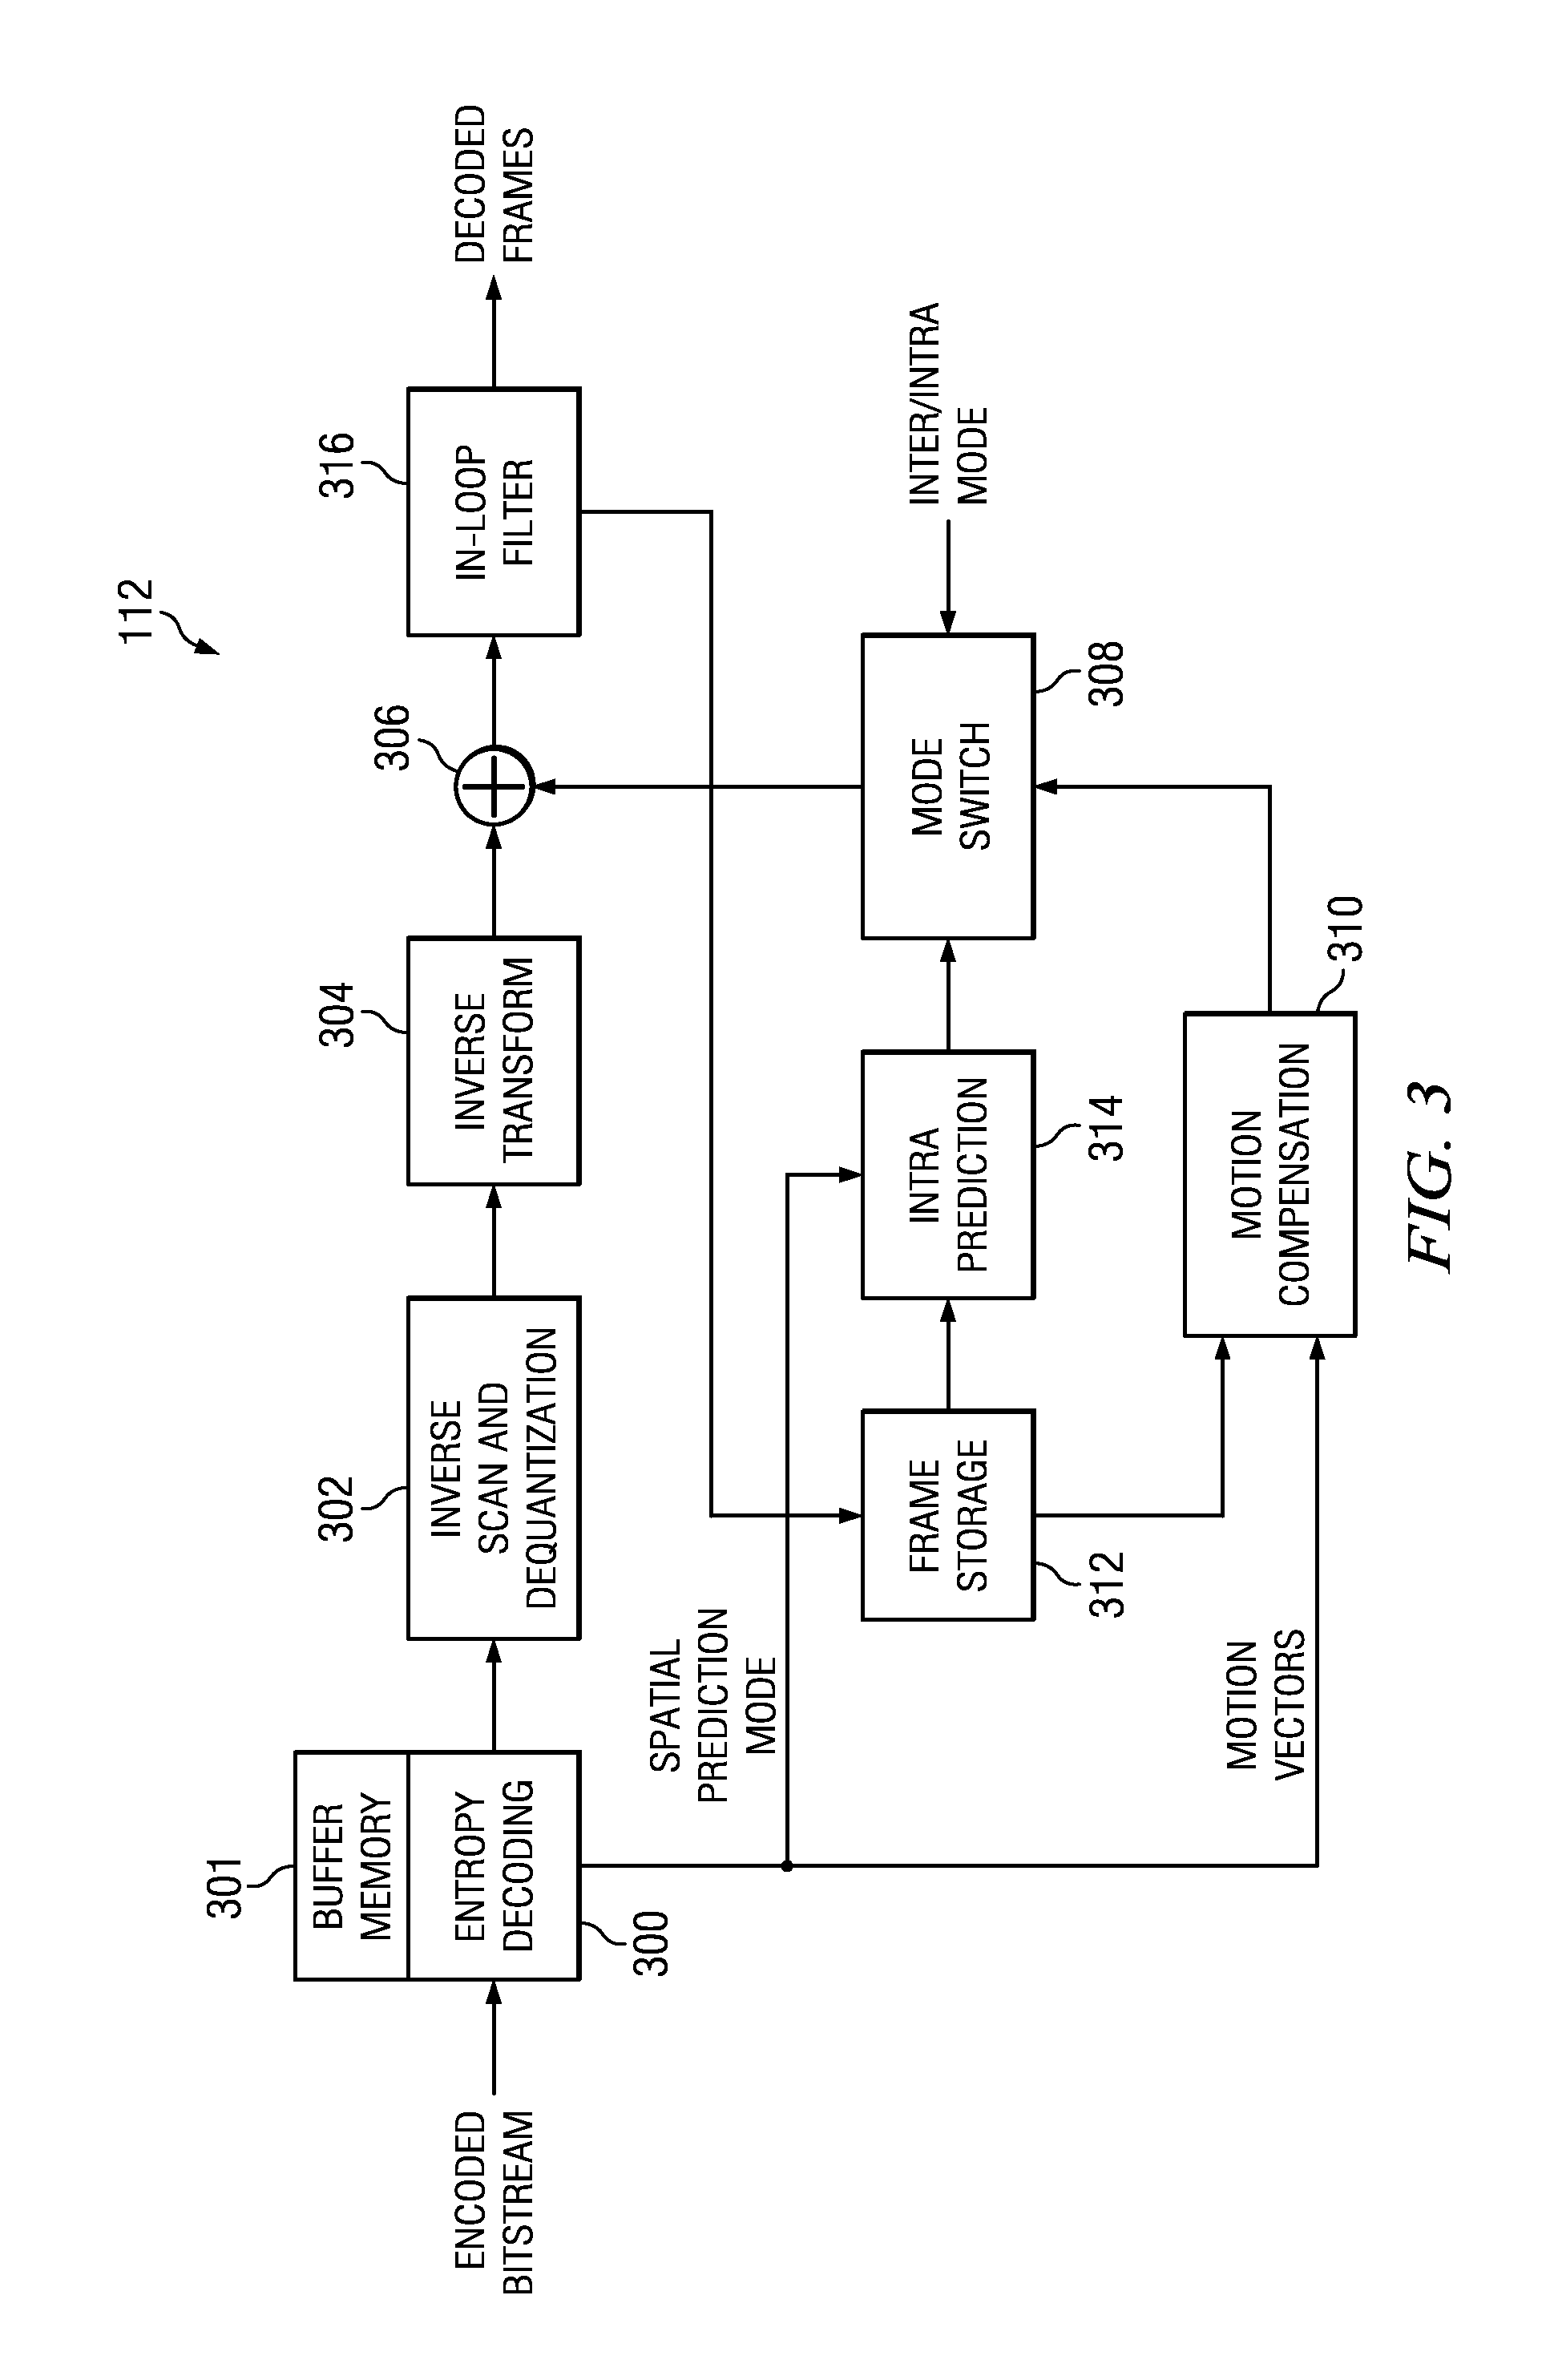 CABAC Decoder with Decoupled Arithmetic Decoding and Inverse Binarization